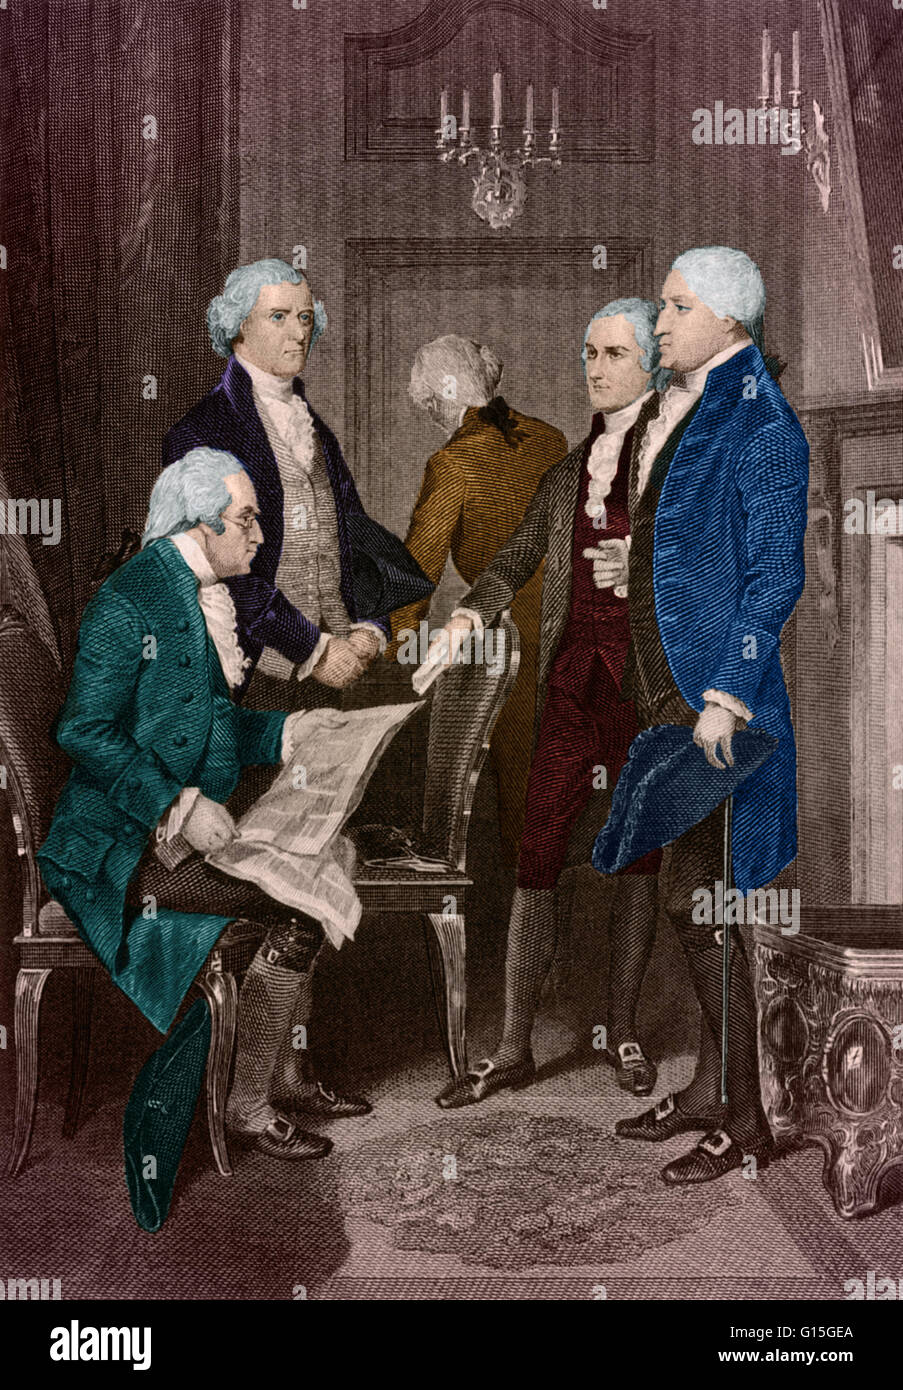 The first presidential administration in 1789. From left to right: Secretary of War Henry Knox, Secretary of State Thomas Jefferson, Secretary of the Treasury Alexander Hamilton and President George Washington. Stock Photo